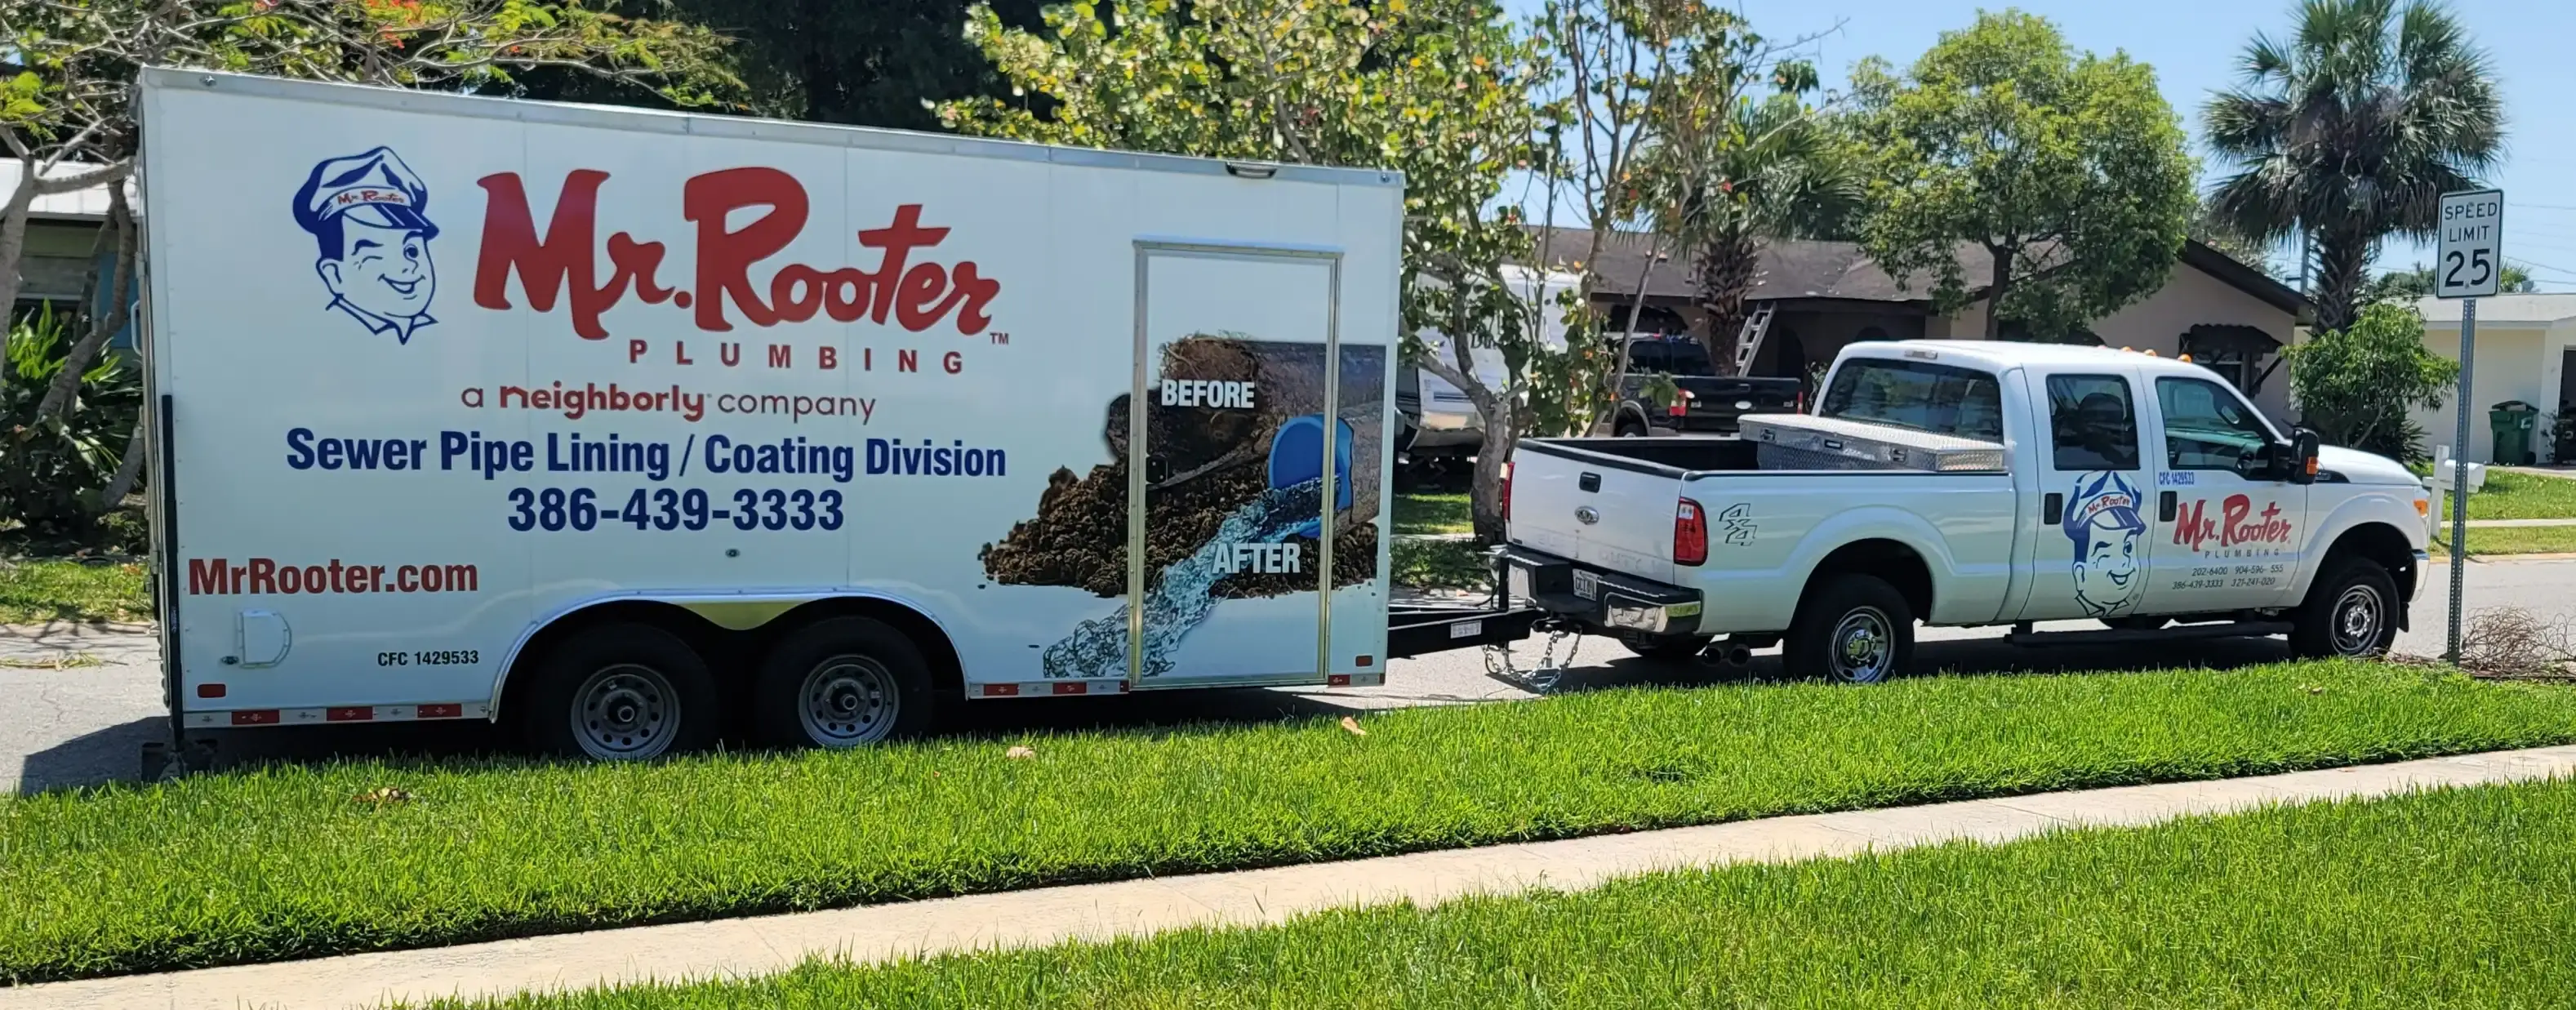 Mr. Rooter Plumbing of the Palm Coast pipe lining truck and trailer.